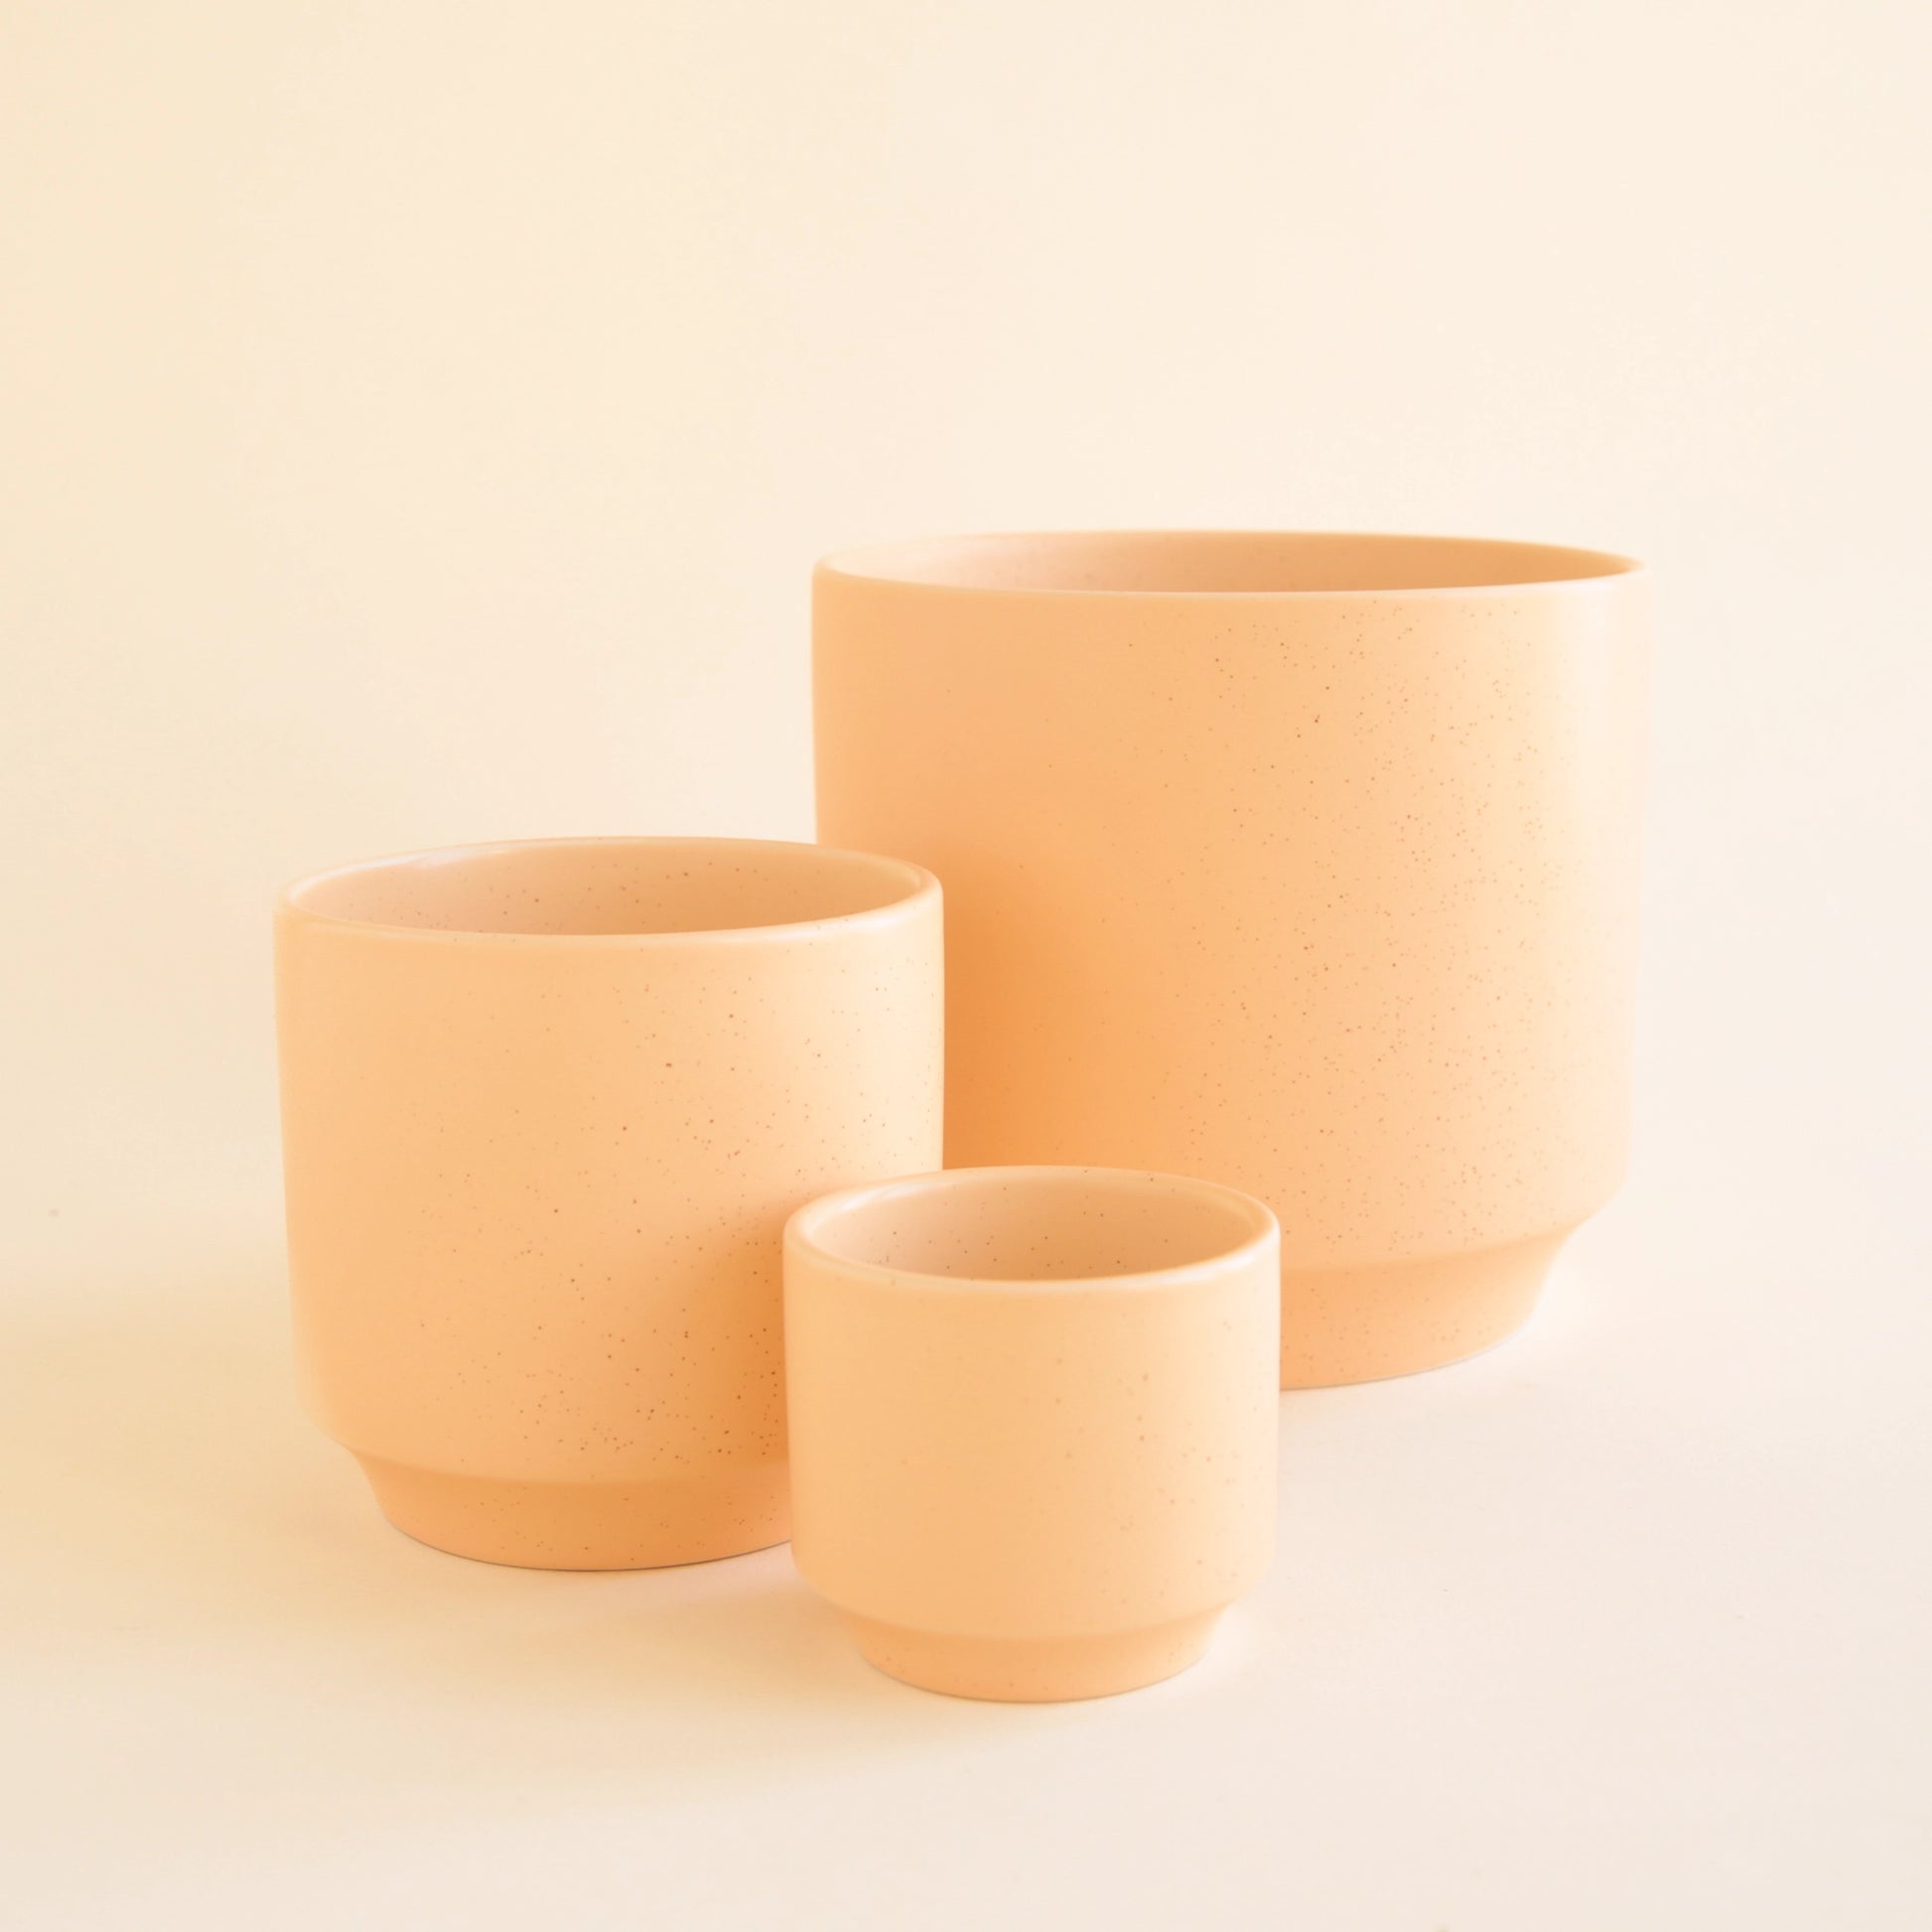 On an ivory background is three different sized ceramic planters in a salmon, pinkish orange shade with a speckle detail and a tapered base. 